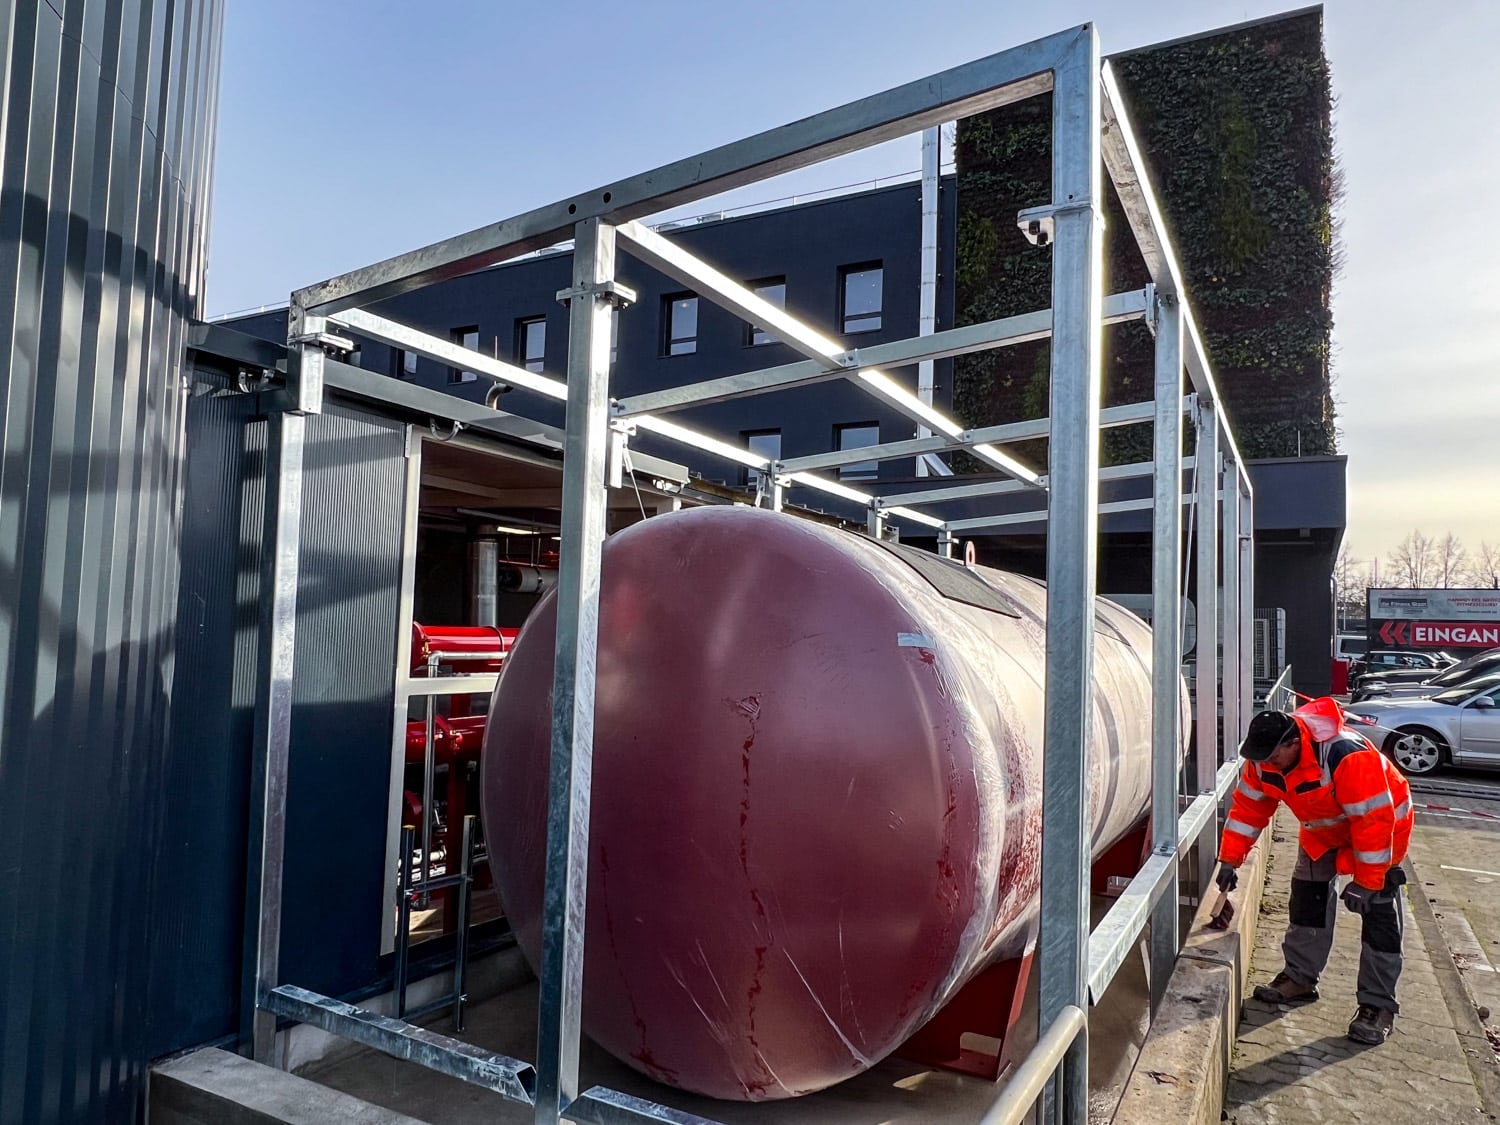 Successful industrial construction expertise from HEIKO Metallbau: Technical room extension and tank enclosure completed at EDEKA. Quality and innovation from a single source.